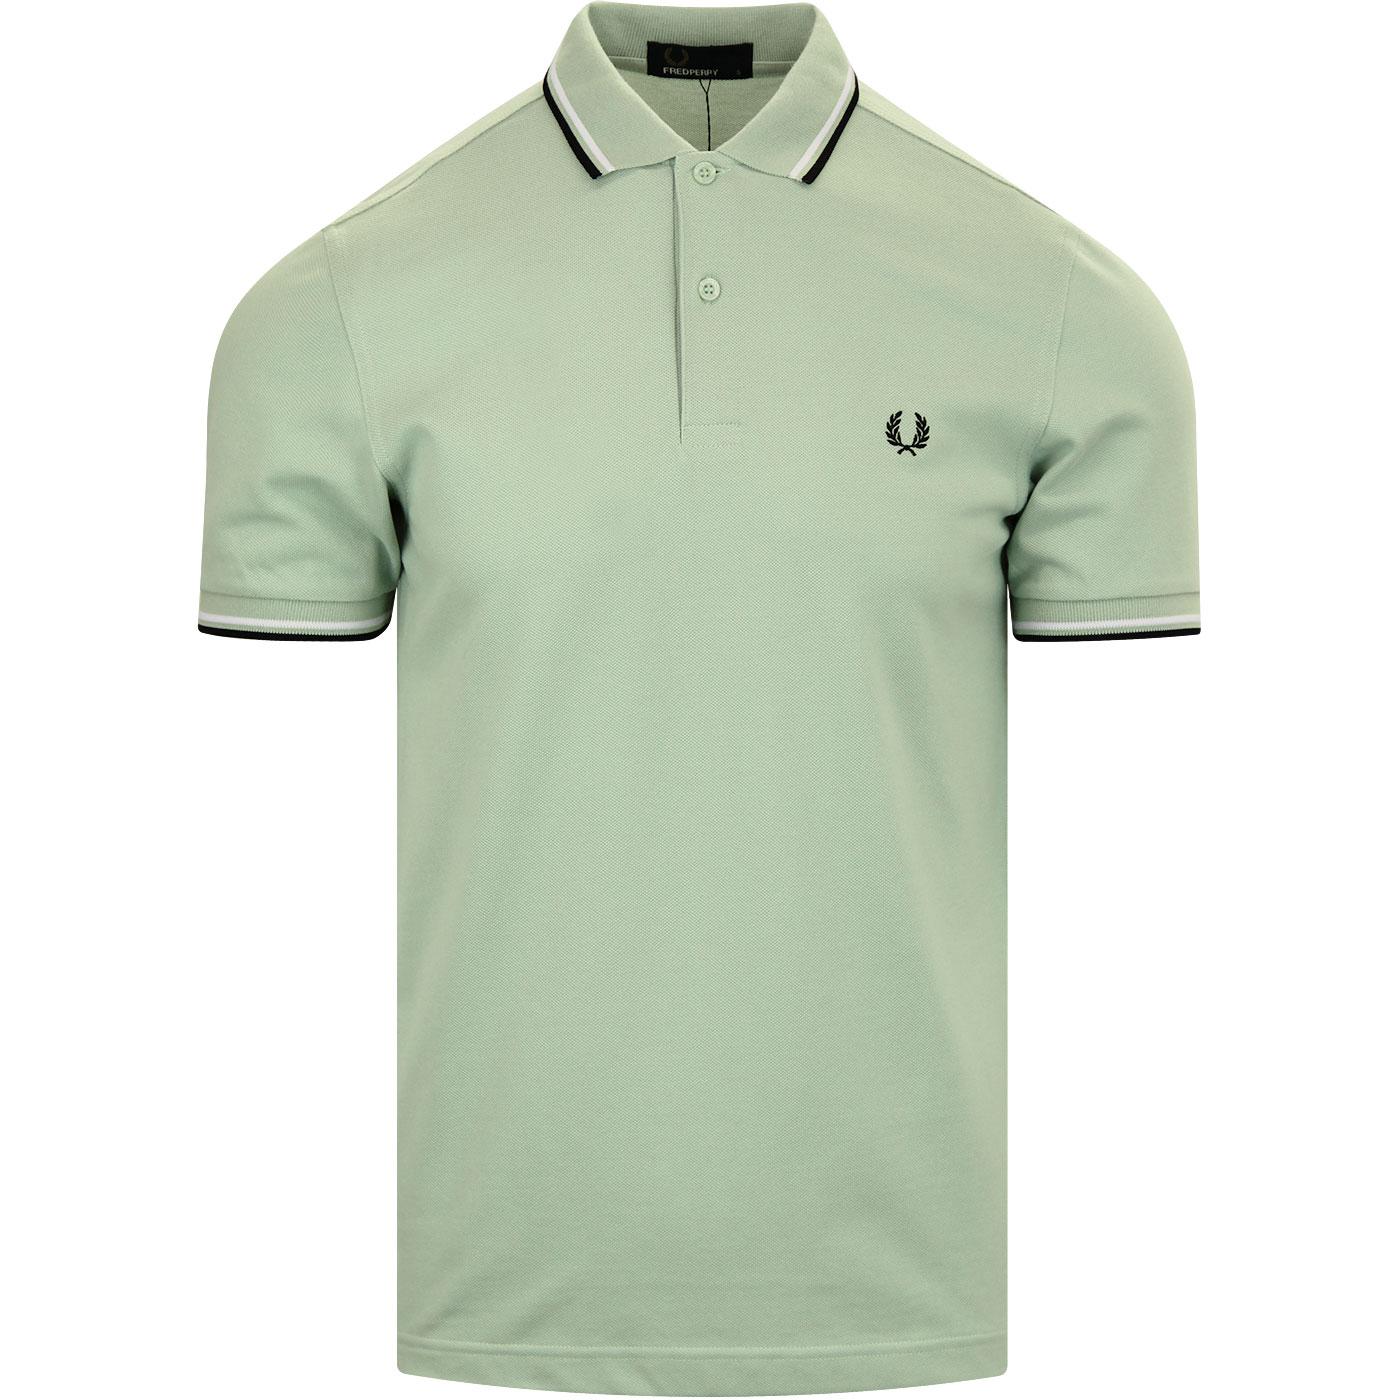 FRED PERRY M3600 Twin Tipped Mod Polo Shirt MINT